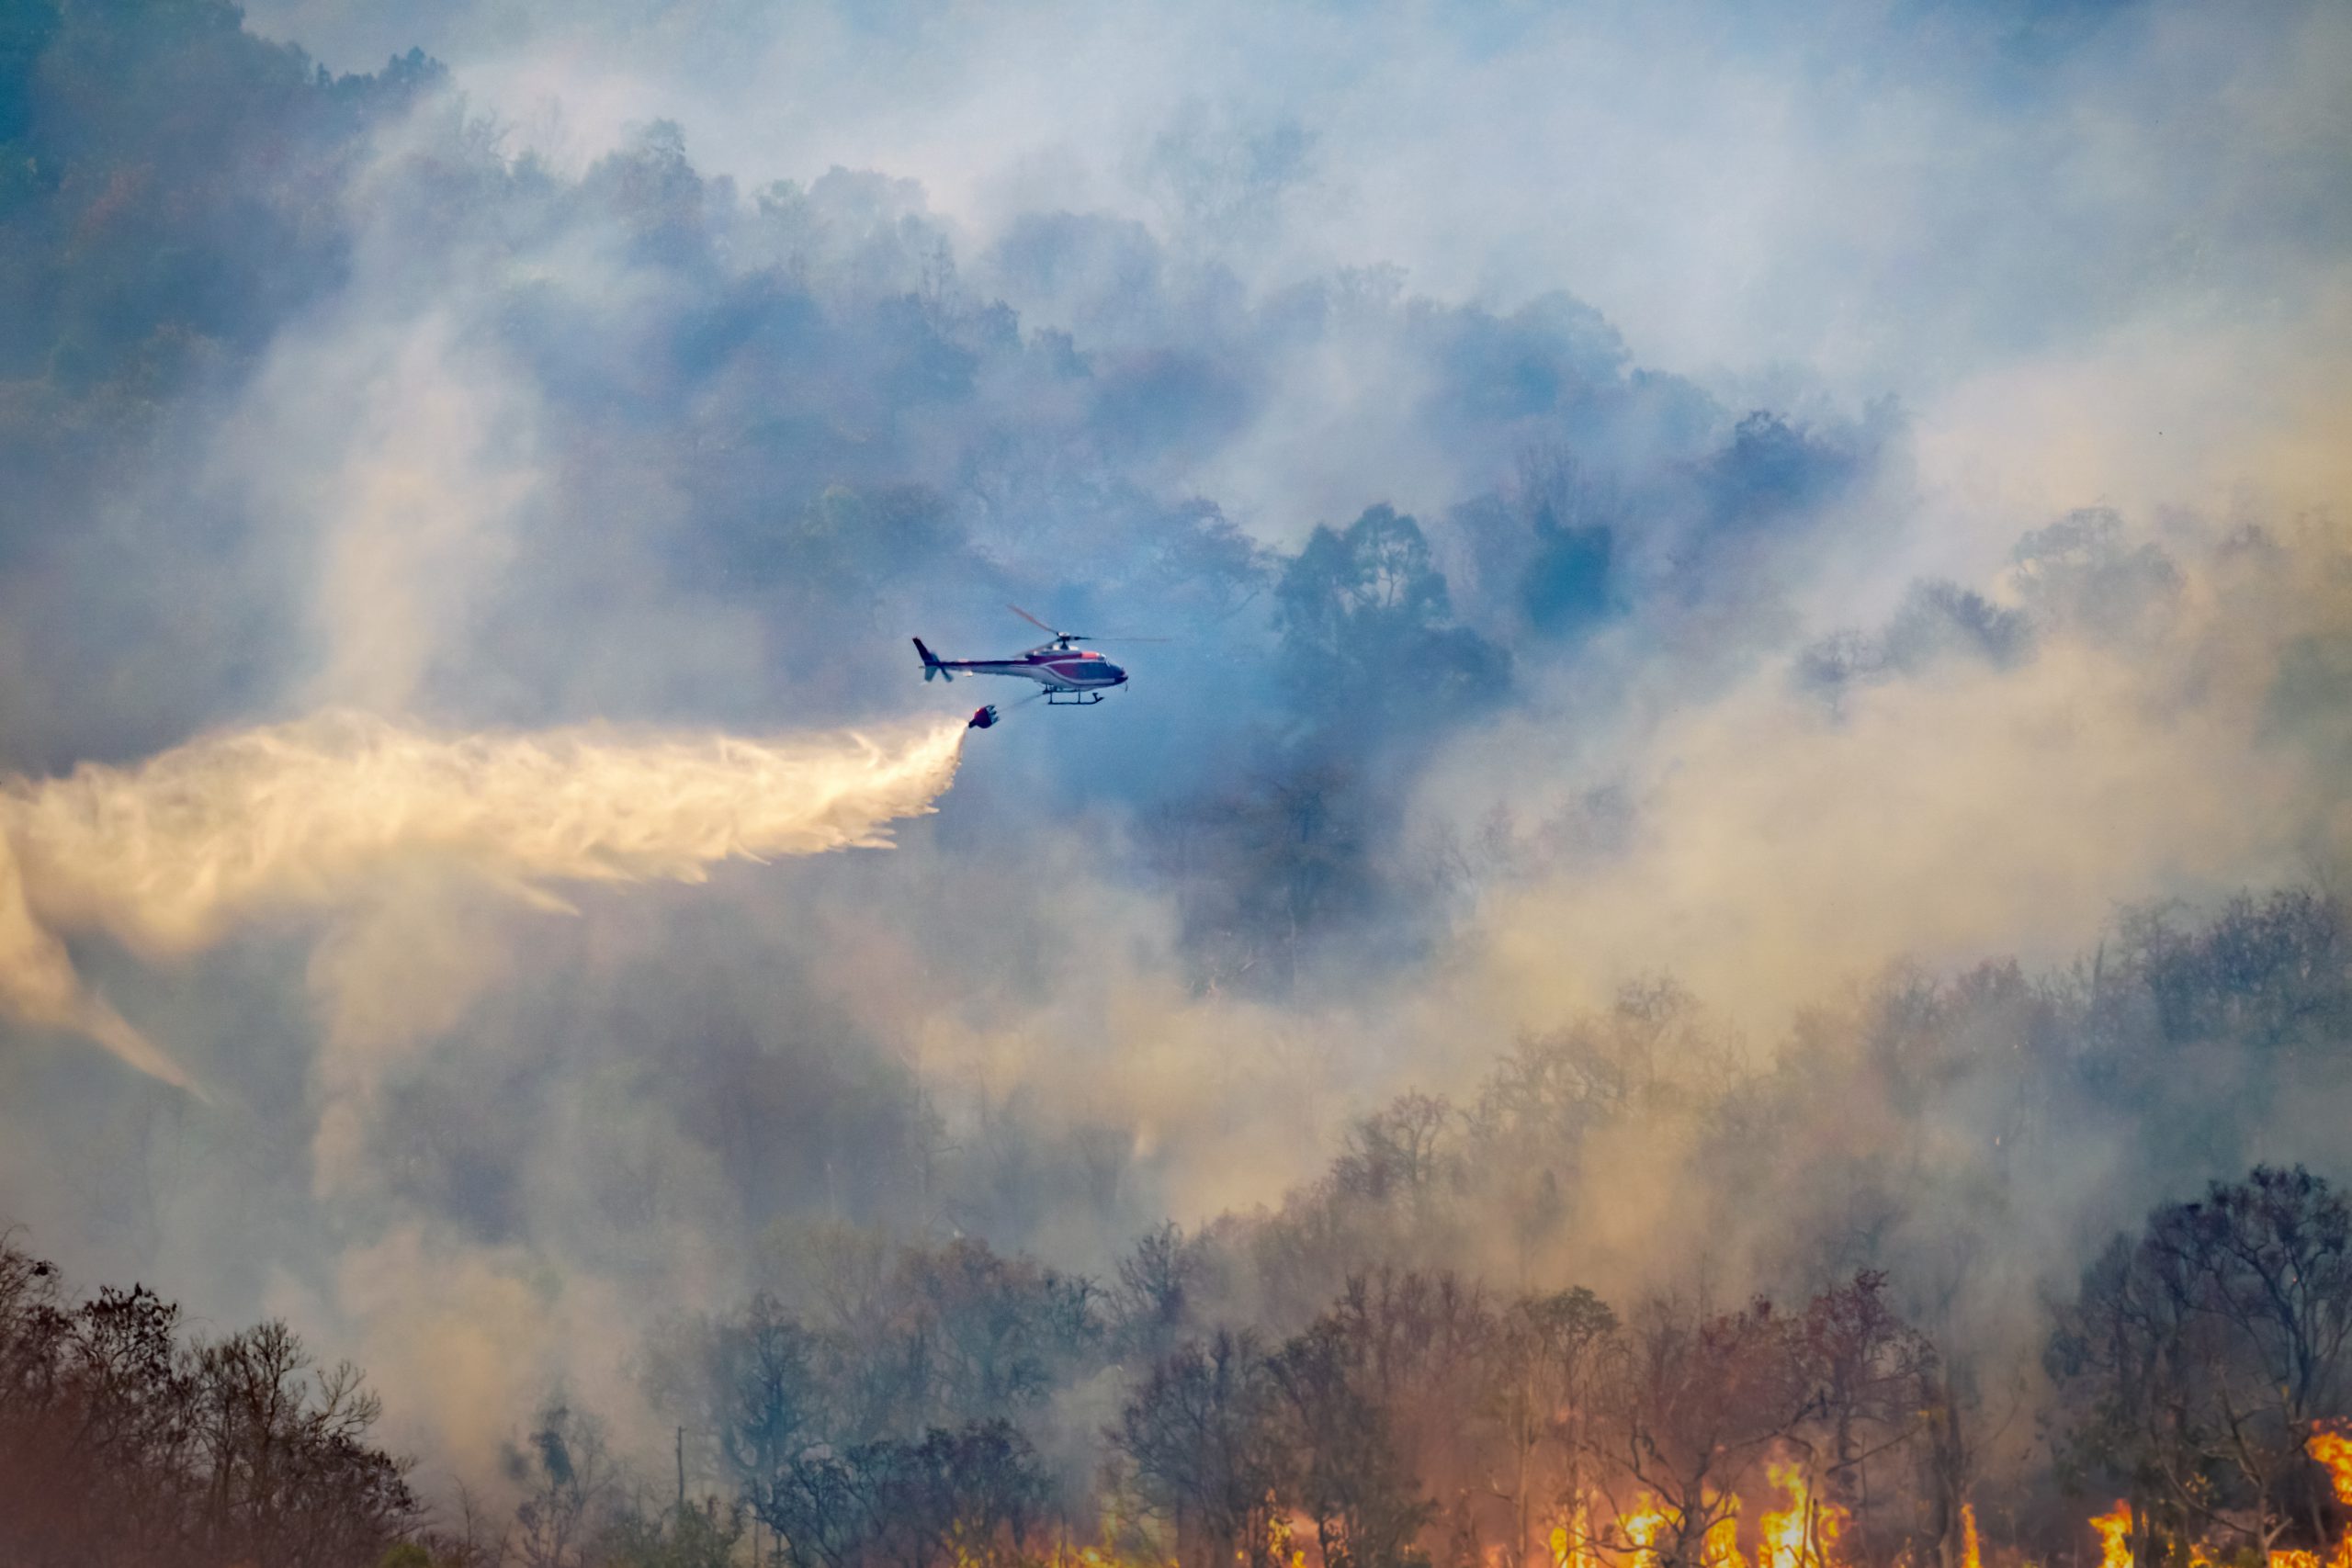 Helicopter drops water on wildfire.